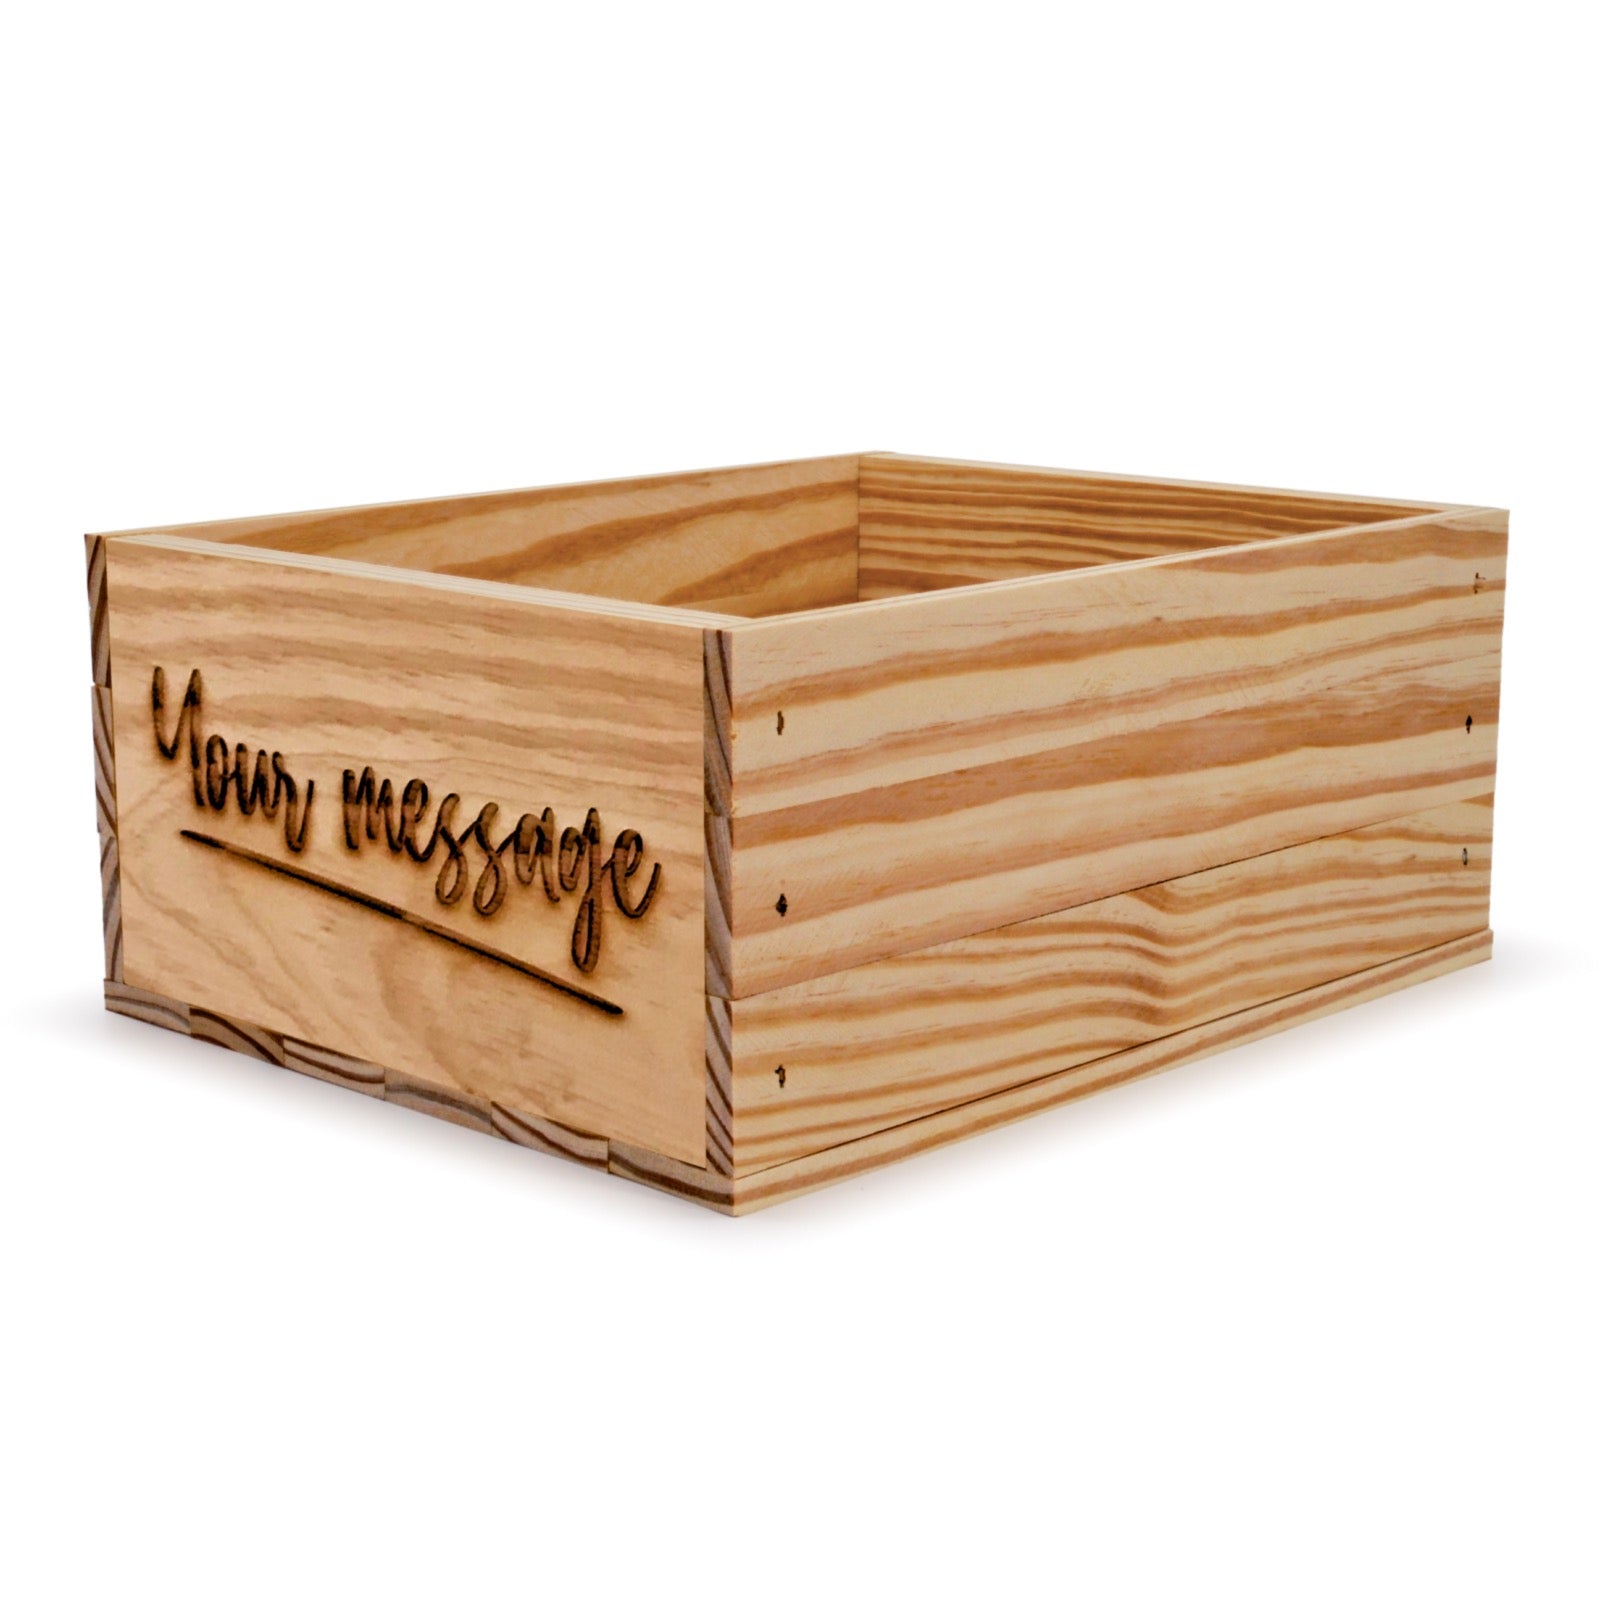 Small wooden crate with custom message 12x9.75x5.25, 6-BX-12-9.75-5.25-ST-NW-NL, 12-BX-12-9.75-5.25-ST-NW-NL, 24-BX-12-9.75-5.25-ST-NW-NL, 48-BX-12-9.75-5.25-ST-NW-NL, 96-BX-12-9.75-5.25-ST-NW-NL